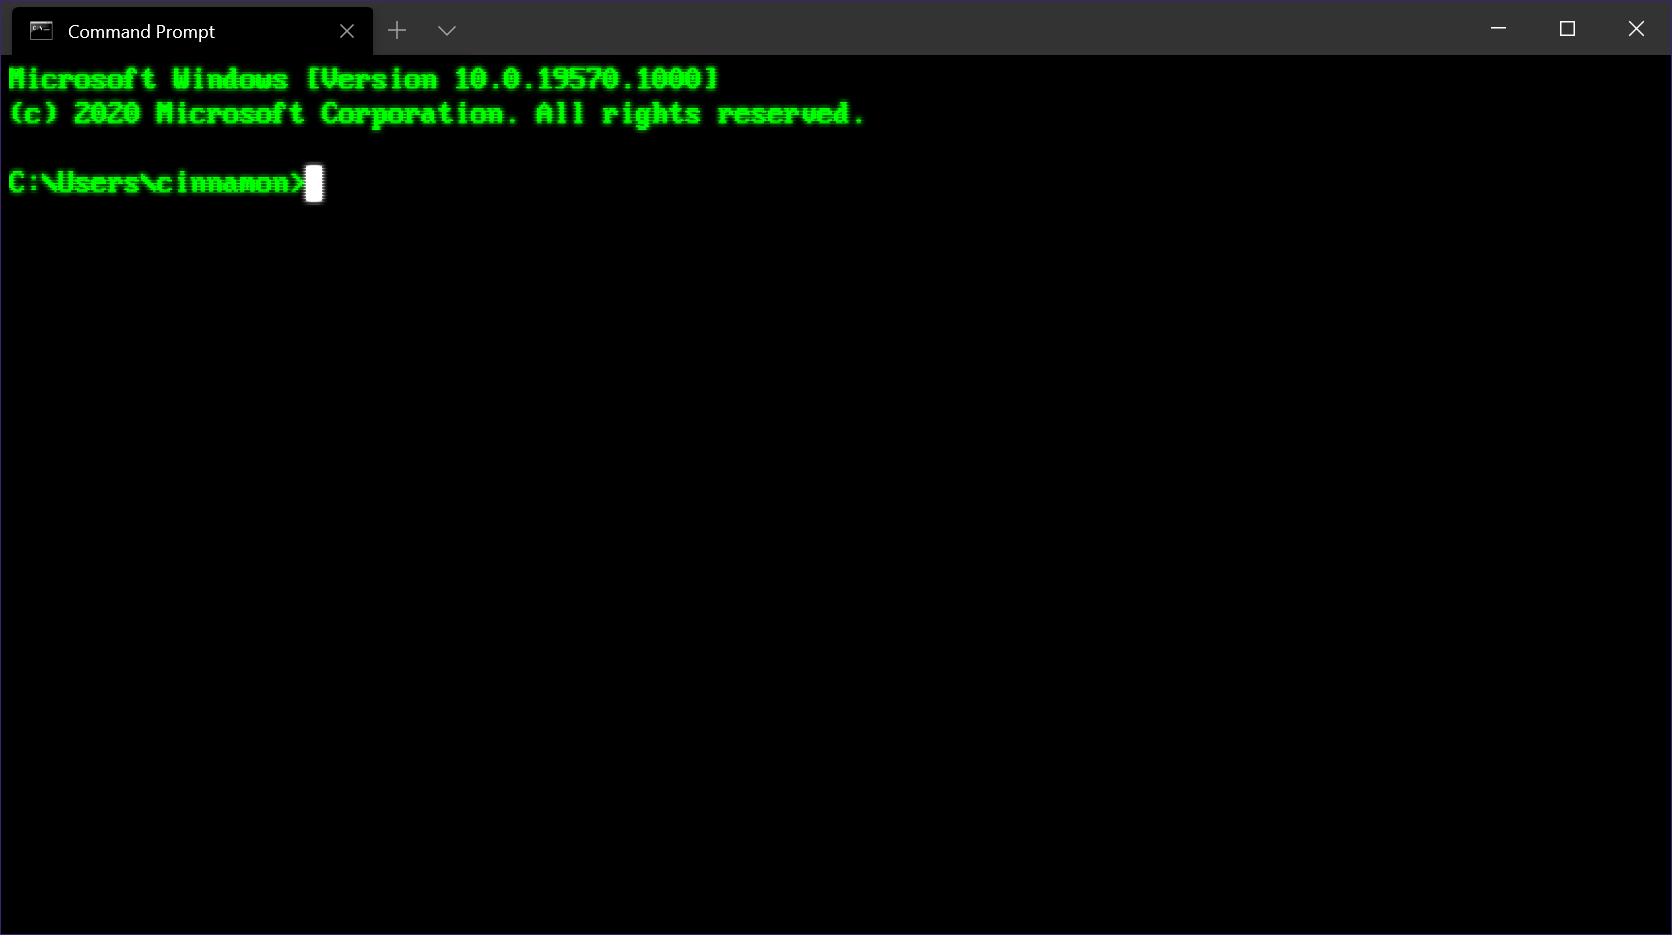 Terminal window with command prompt